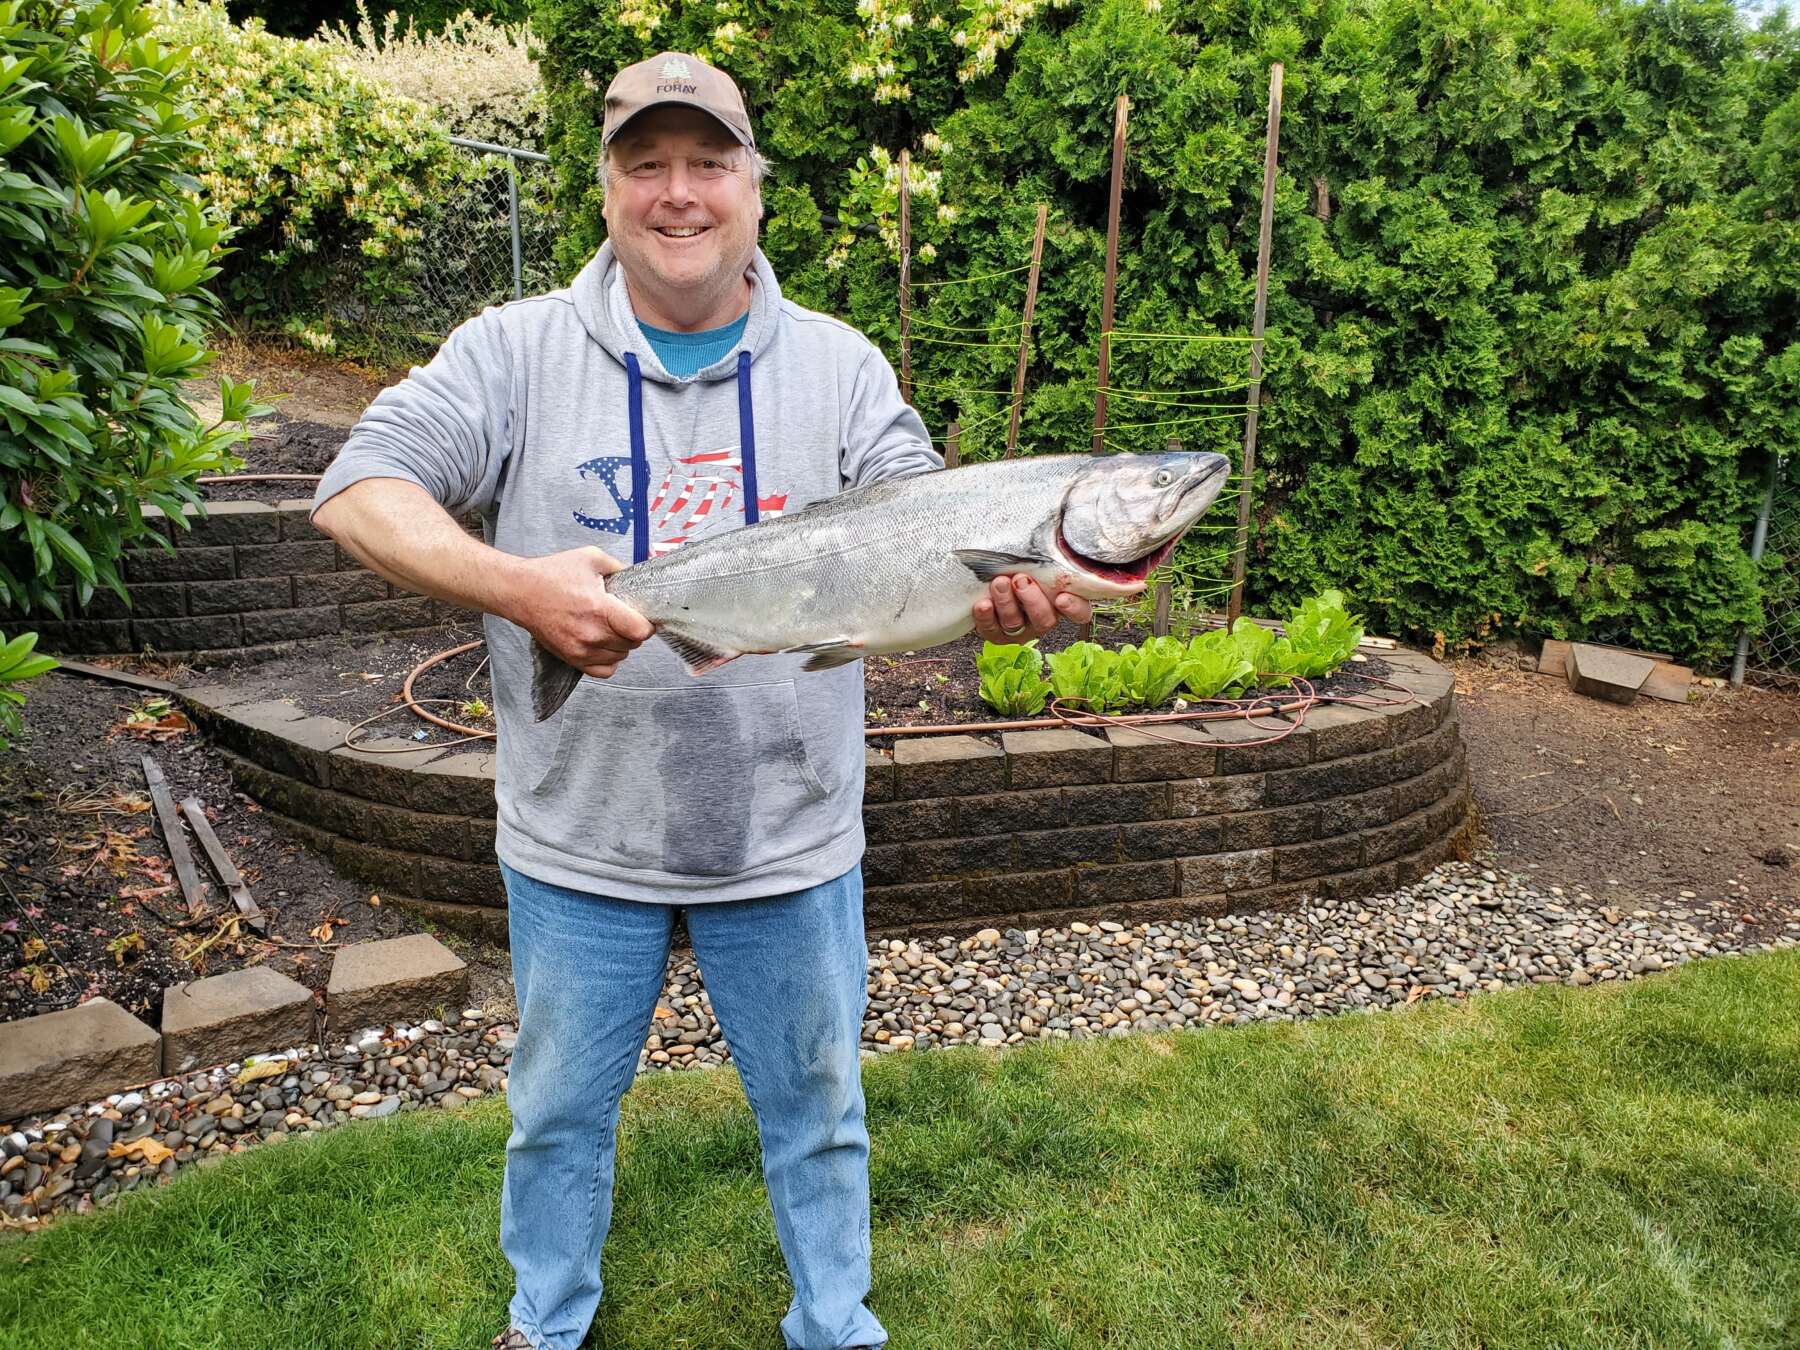 Image of Peter DeChant with Salmon